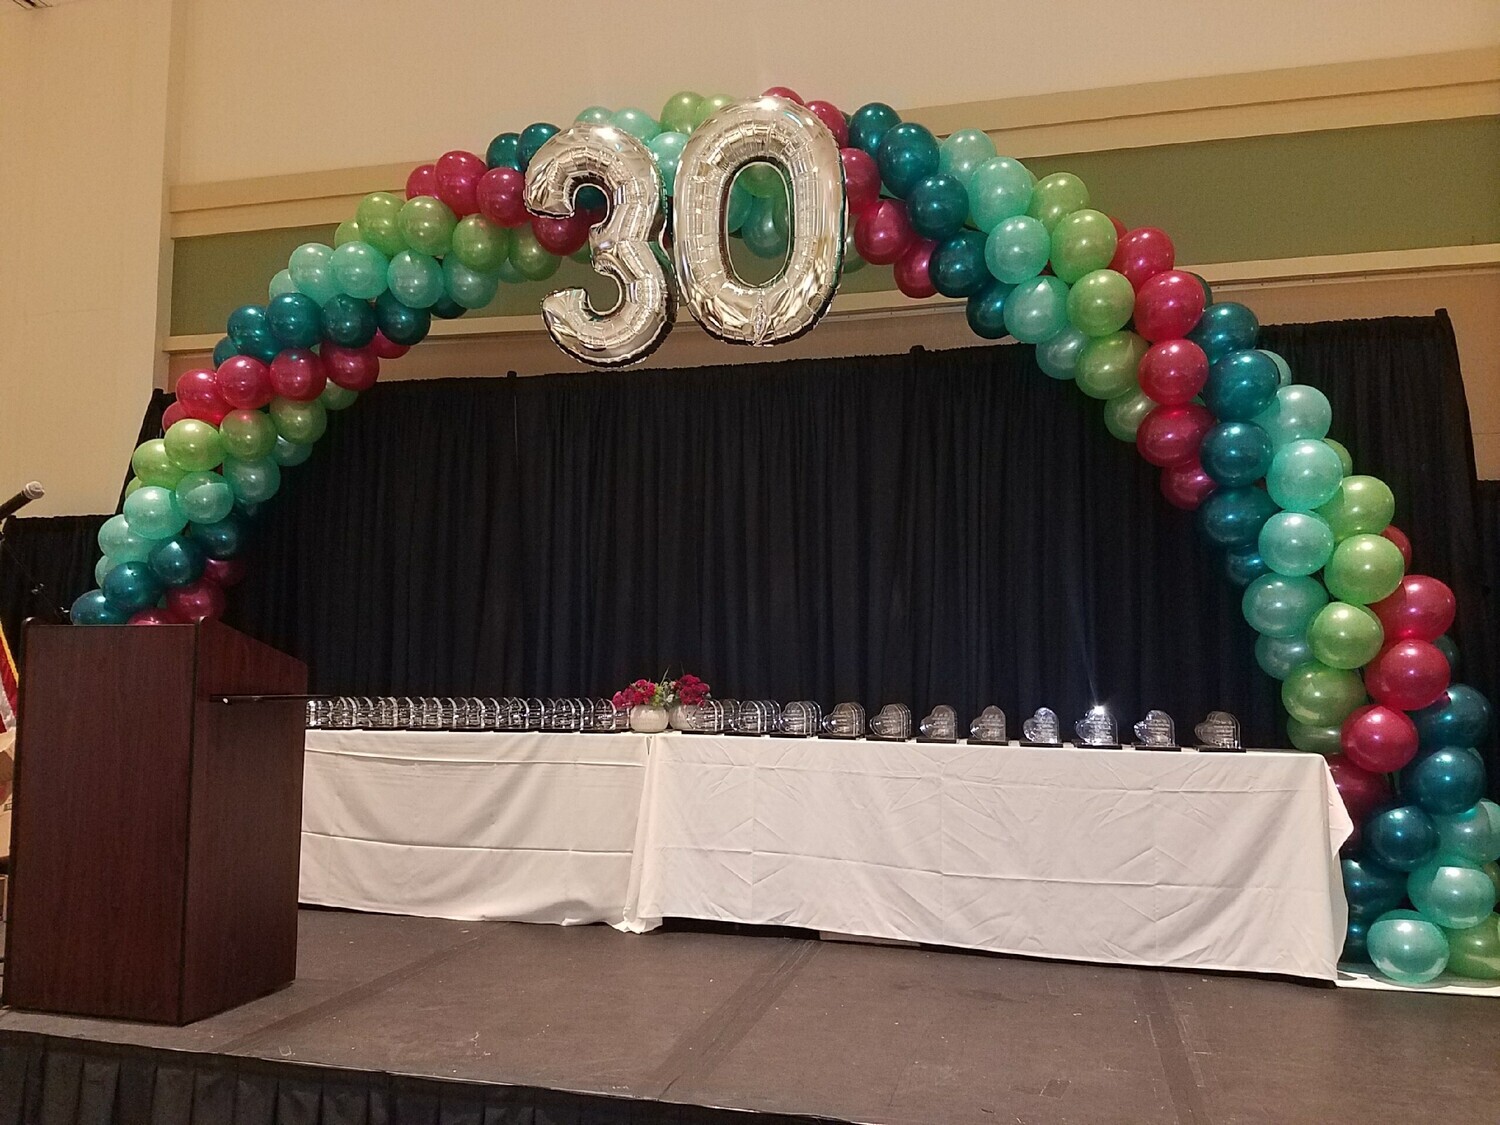 Traditional Balloon arch with birthday number